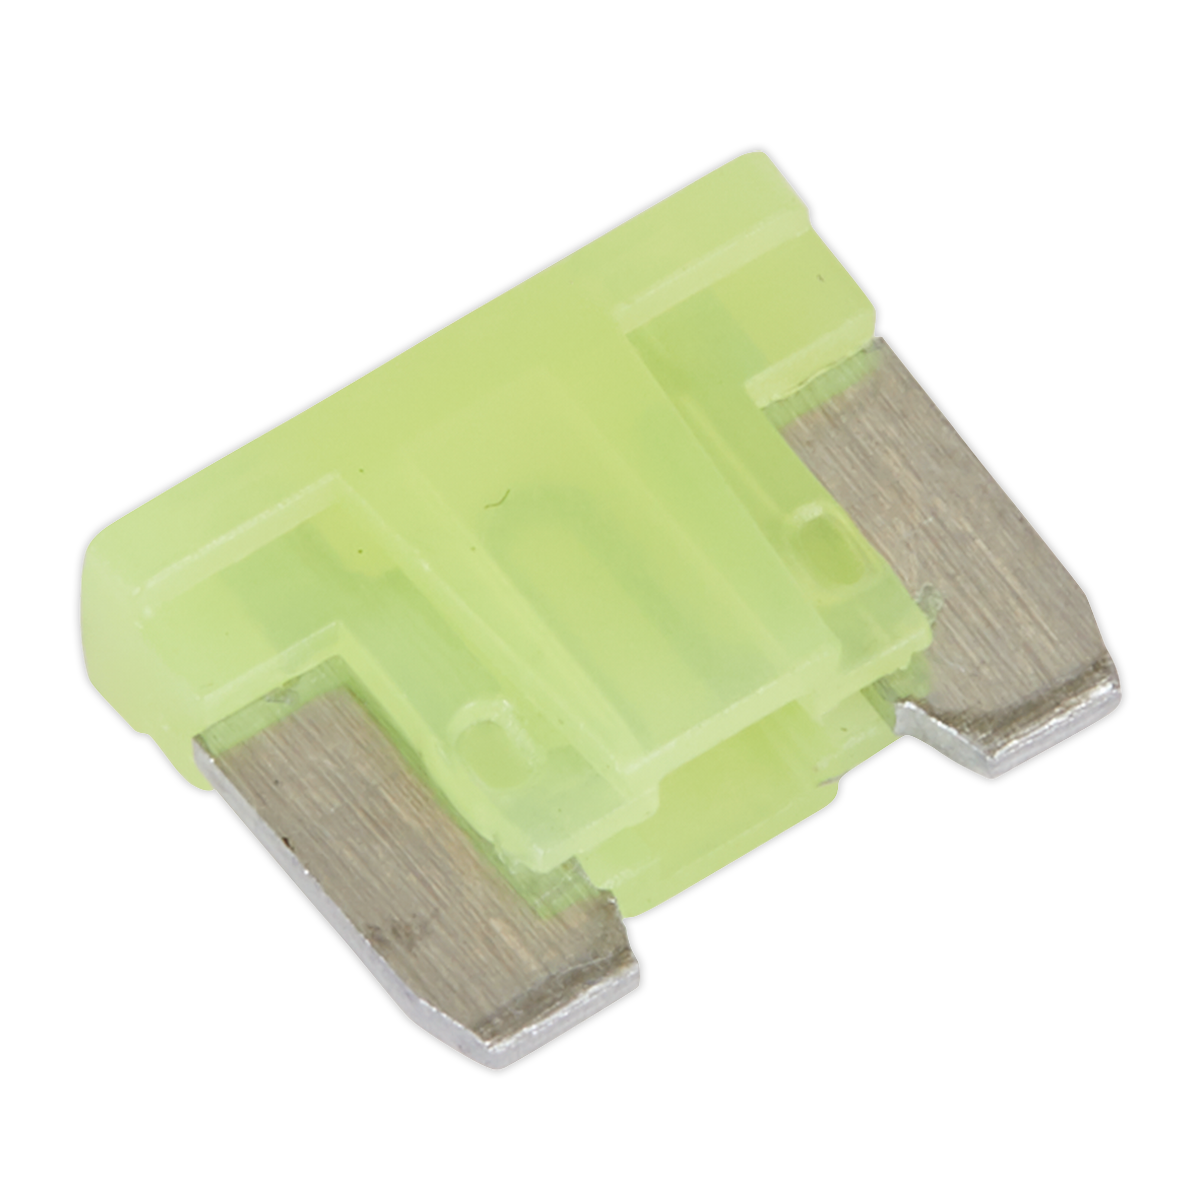 Automotive MICRO Blade Fuse 20A - Pack of 50 - MIBF20 - Farming Parts